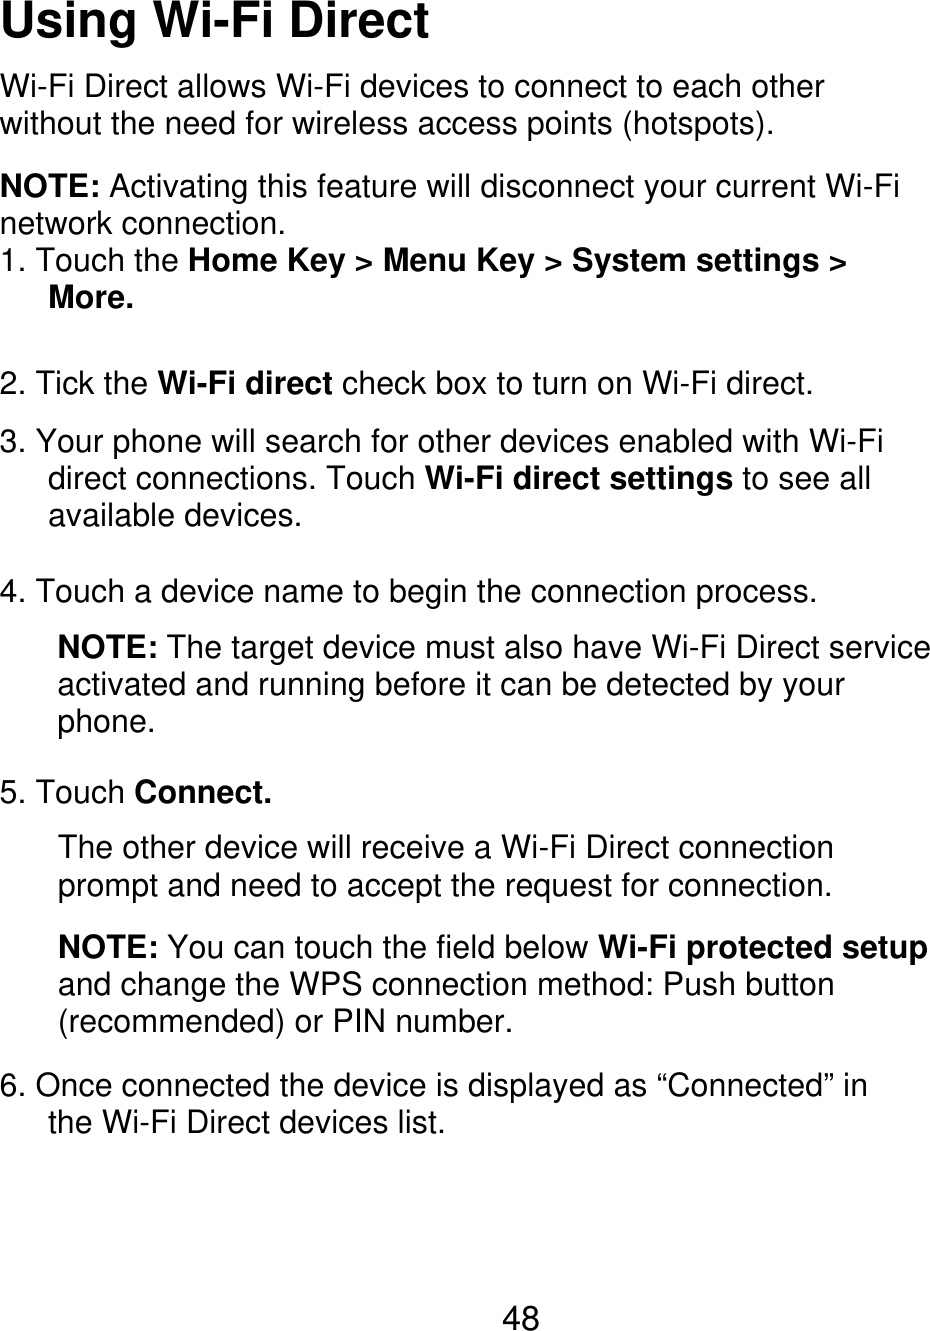 Using Wi-Fi Direct Wi-Fi Direct allows Wi-Fi devices to connect to each other without the need for wireless access points (hotspots). NOTE: Activating this feature will disconnect your current Wi-Fi network connection. 1. Touch the Home Key &gt; Menu Key &gt; System settings &gt;    More. 2. Tick the Wi-Fi direct check box to turn on Wi-Fi direct. 3. Your phone will search for other devices enabled with Wi-Fi    direct connections. Touch Wi-Fi direct settings to see all    available devices. 4. Touch a device name to begin the connection process. NOTE: The target device must also have Wi-Fi Direct service activated and running before it can be detected by your phone. 5. Touch Connect. The other device will receive a Wi-Fi Direct connection prompt and need to accept the request for connection. NOTE: You can touch the field below Wi-Fi protected setup and change the WPS connection method: Push button (recommended) or PIN number. 6. Once connected the device is displayed as “Connected” in       the Wi-Fi Direct devices list. 48 